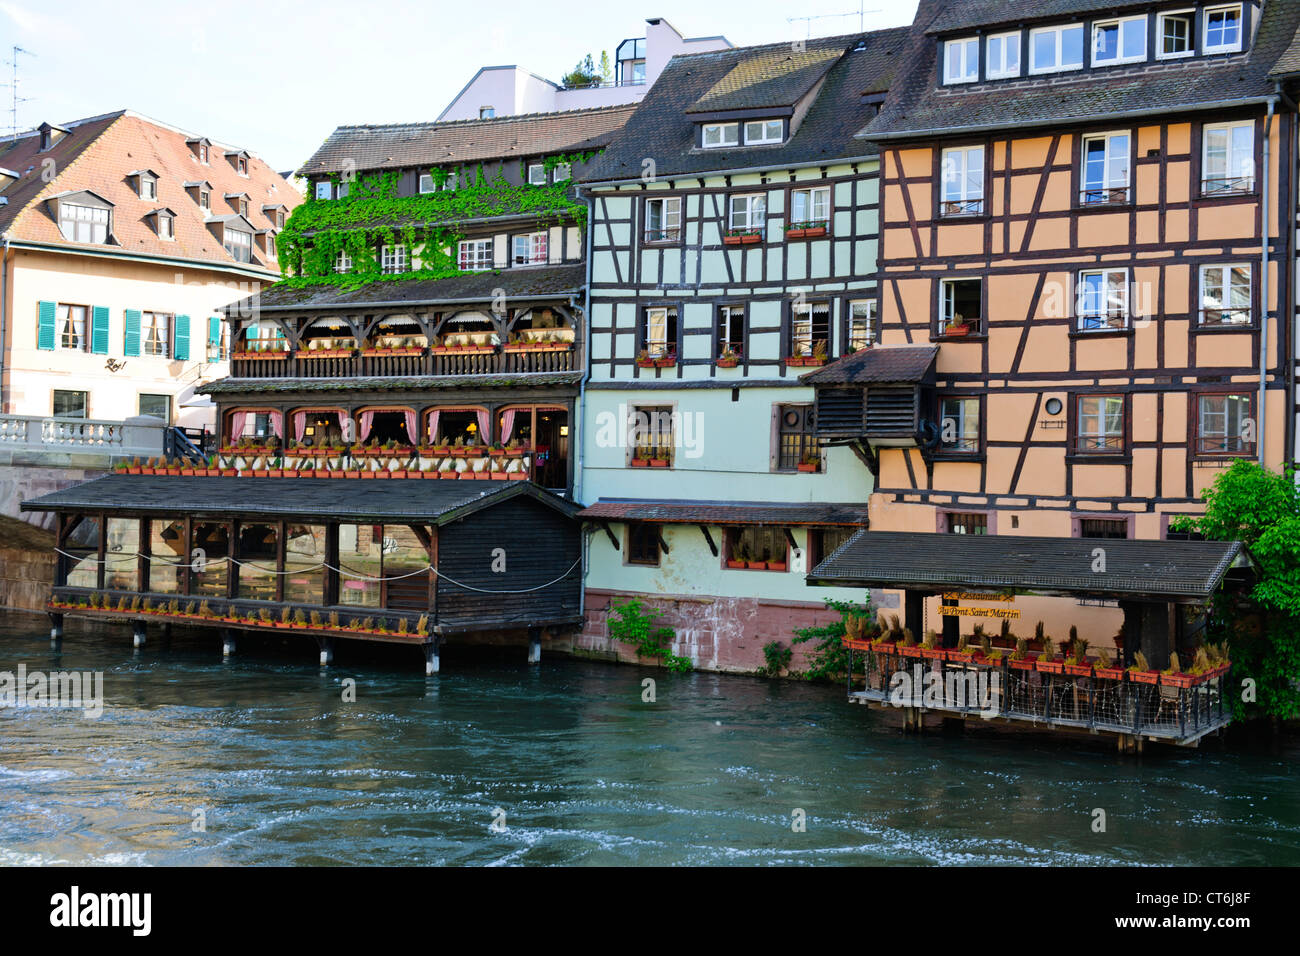 Timbered and Half Timbered mediaeval Houses,Quai Ch.Frey,Petit France,L'ill River,Sleuce Gates,Strasbourg,France Stock Photo